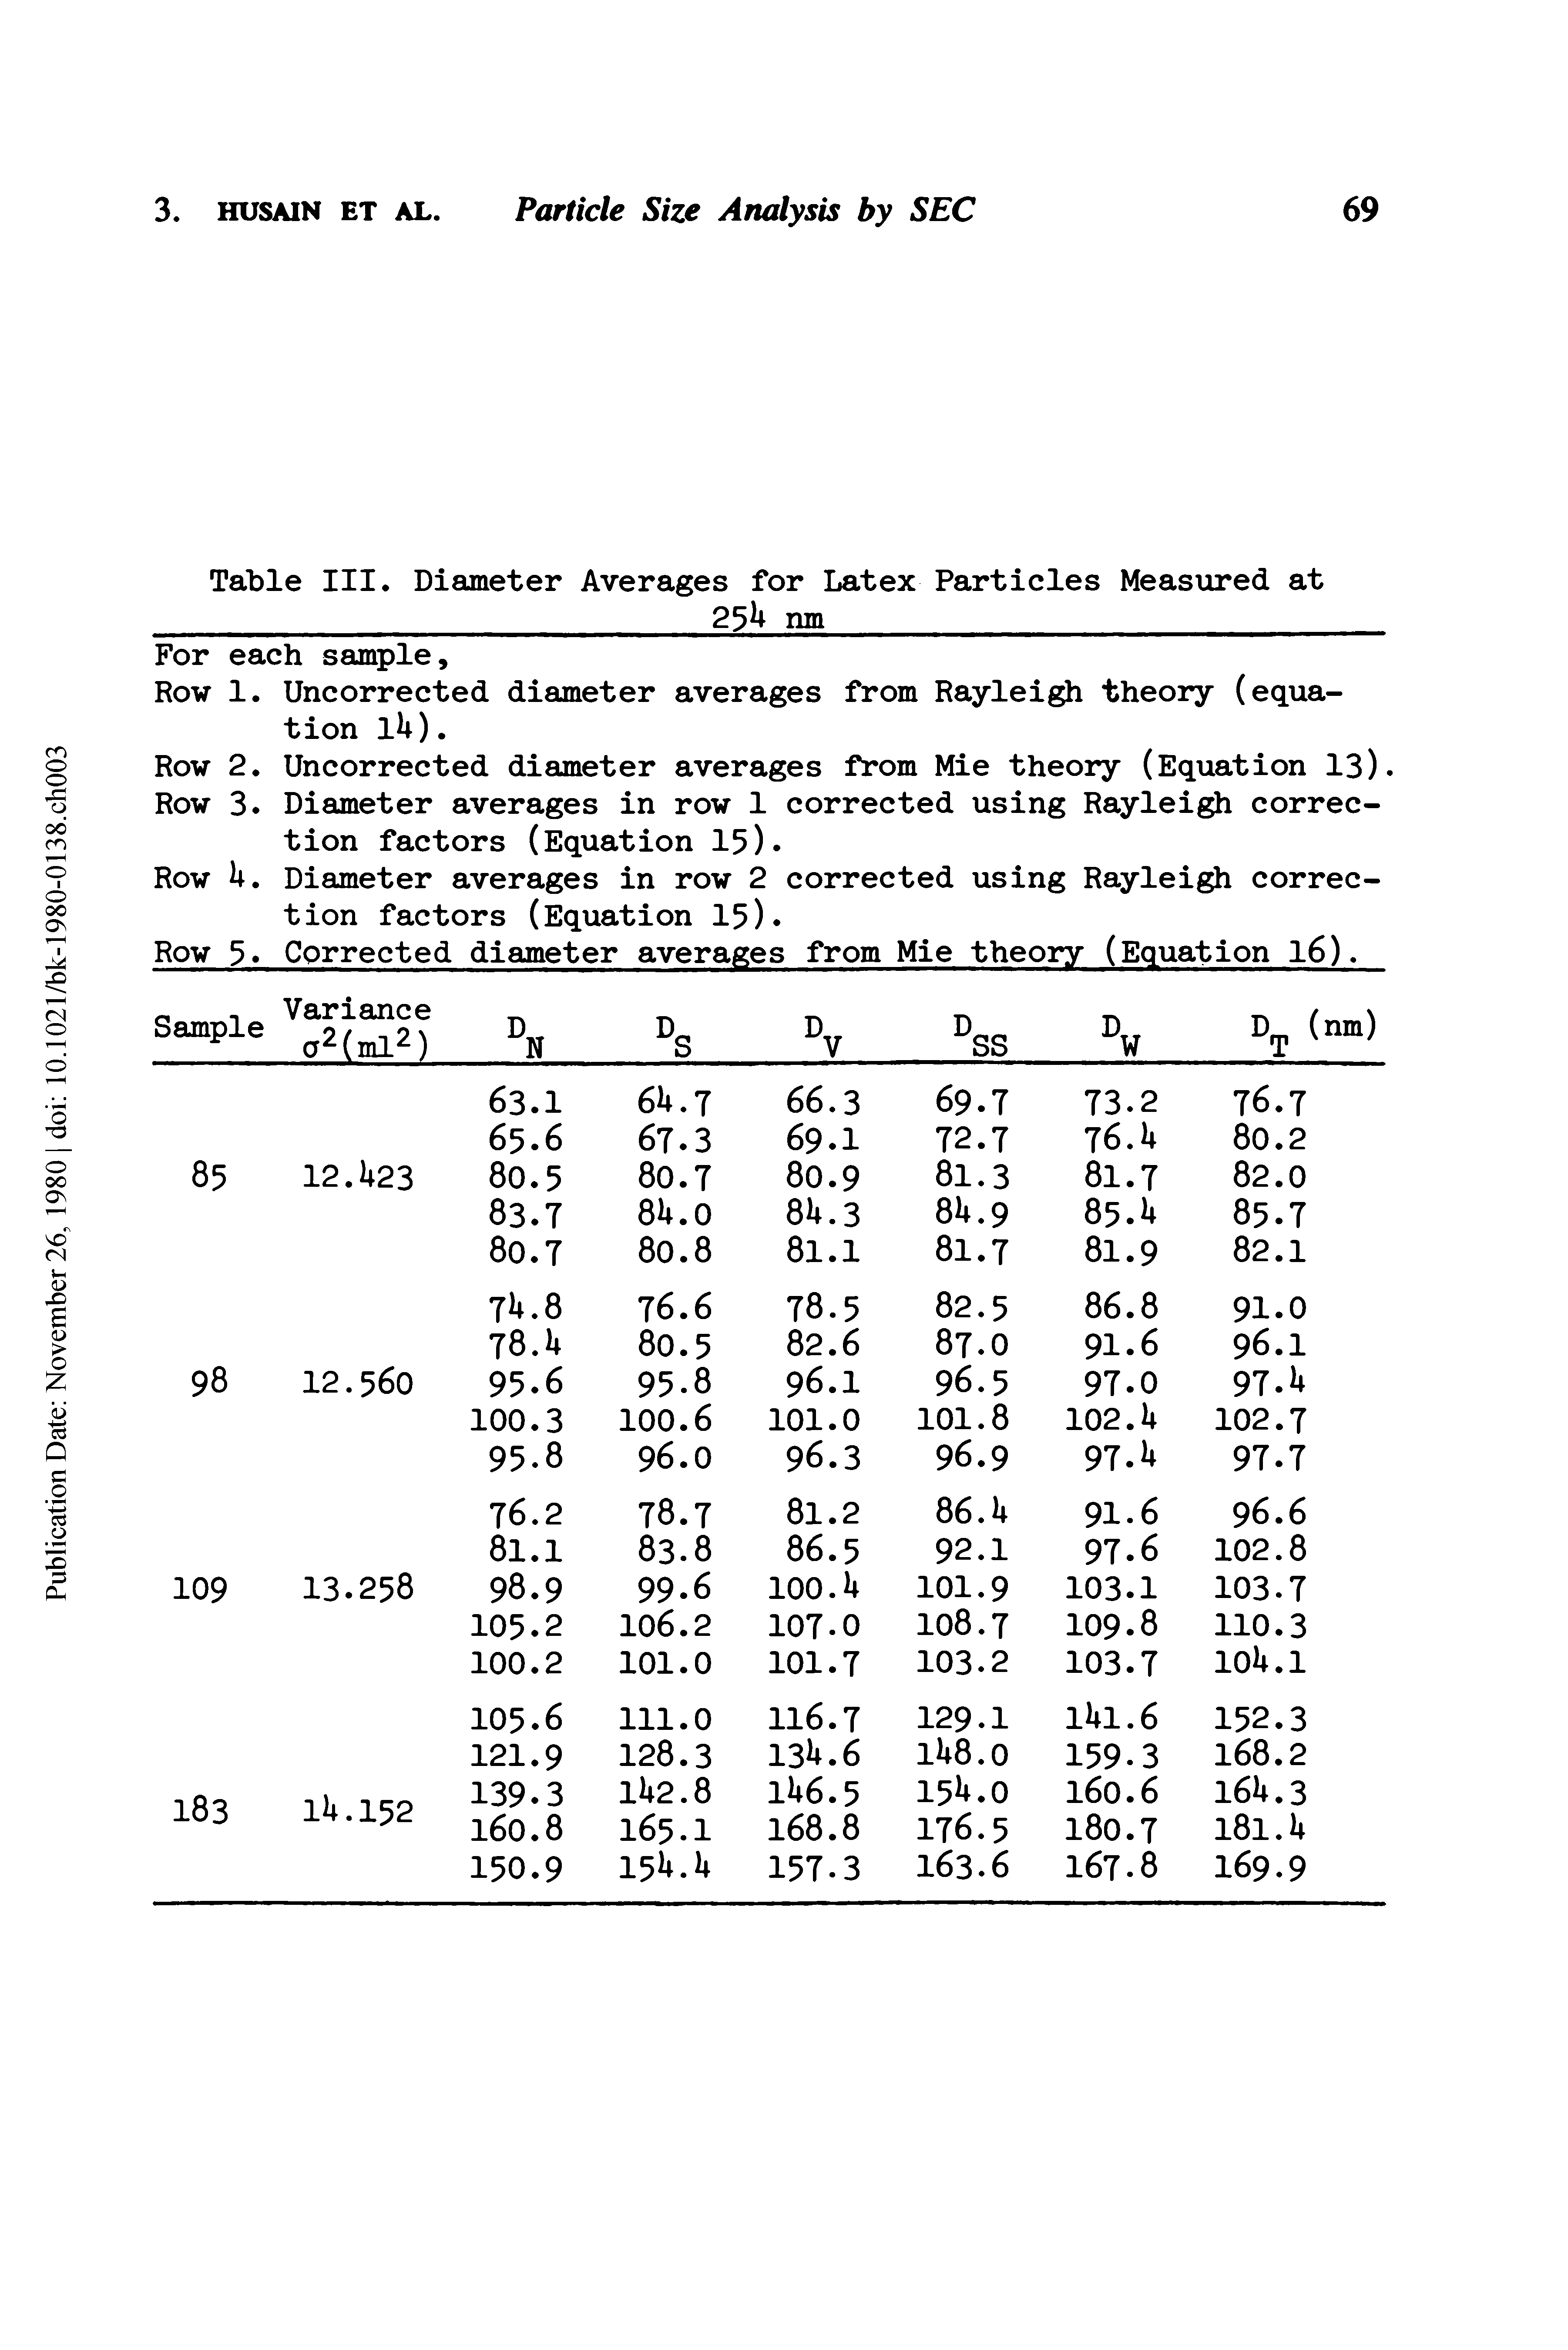 Table III. Diameter Averages for Latex Particles Measured at...